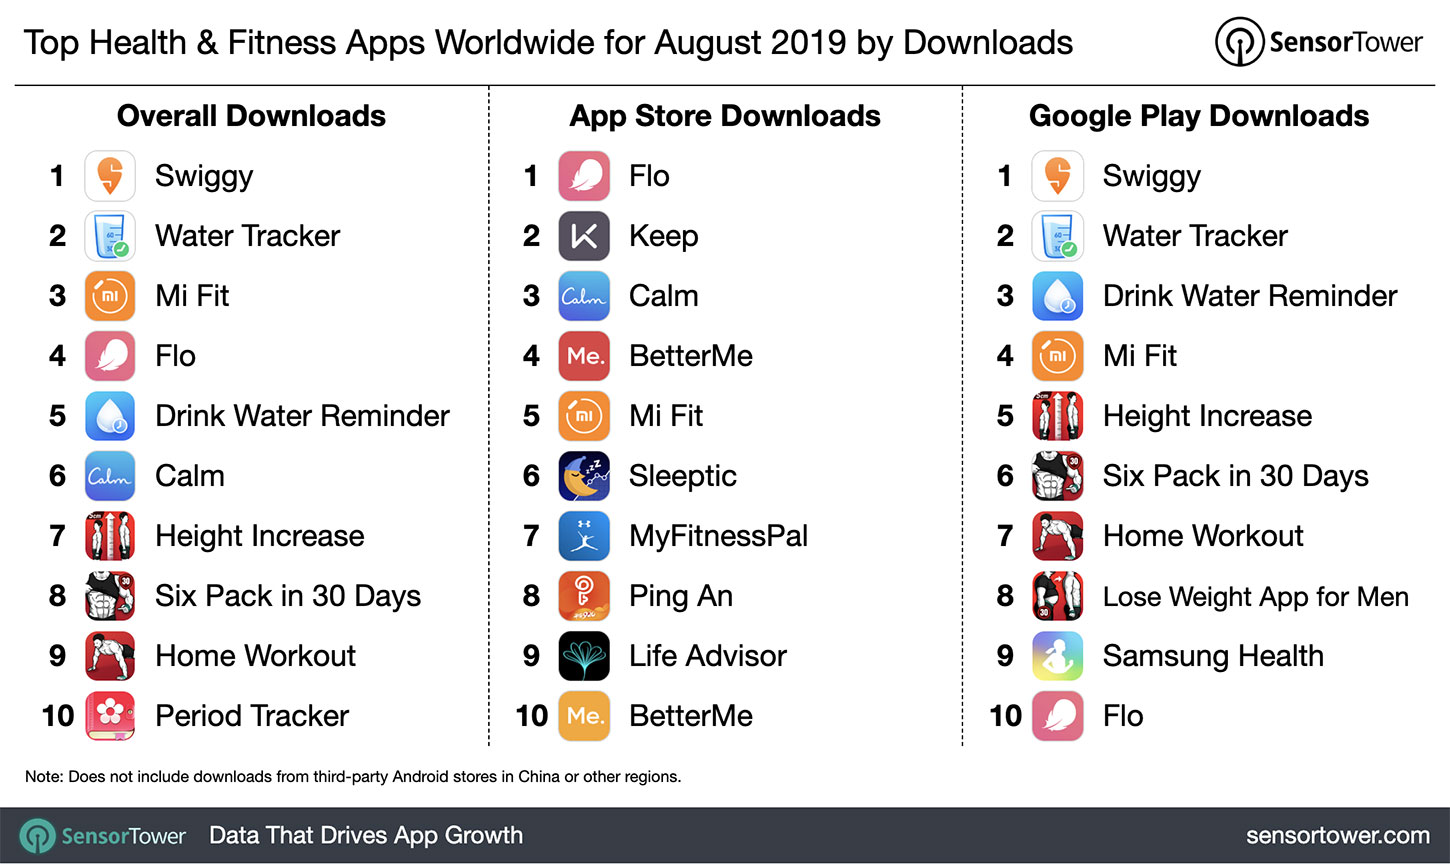 Top Health & Fitness Category Apps Worldwide for August 2019 by Downloads